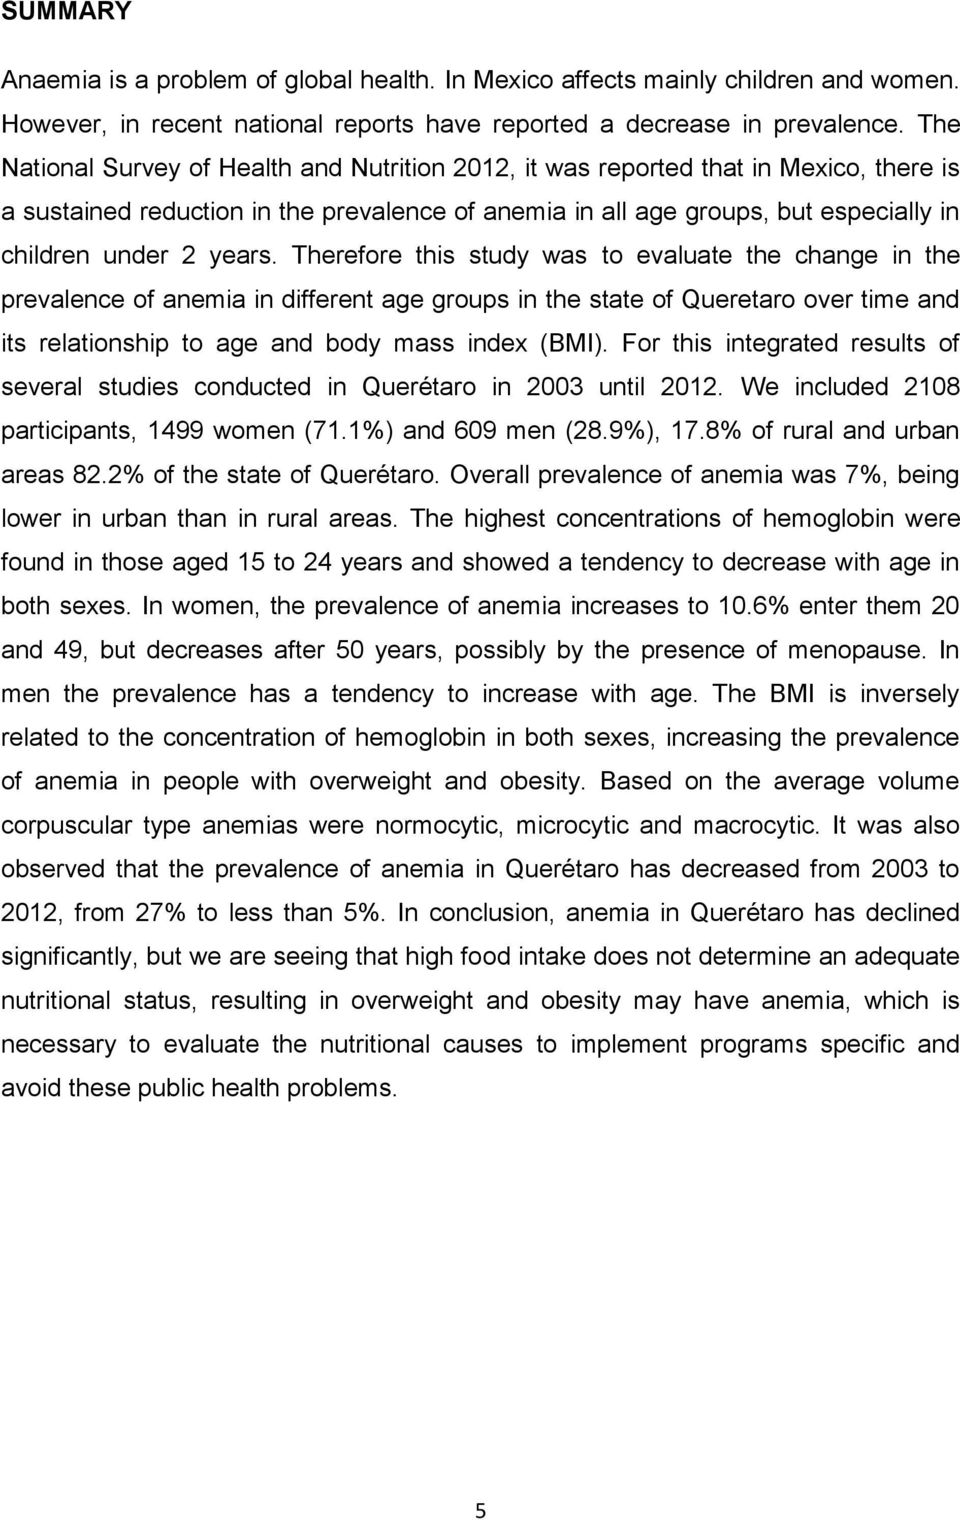 years. Therefore this study was to evaluate the change in the prevalence of anemia in different age groups in the state of Queretaro over time and its relationship to age and body mass index (BMI).